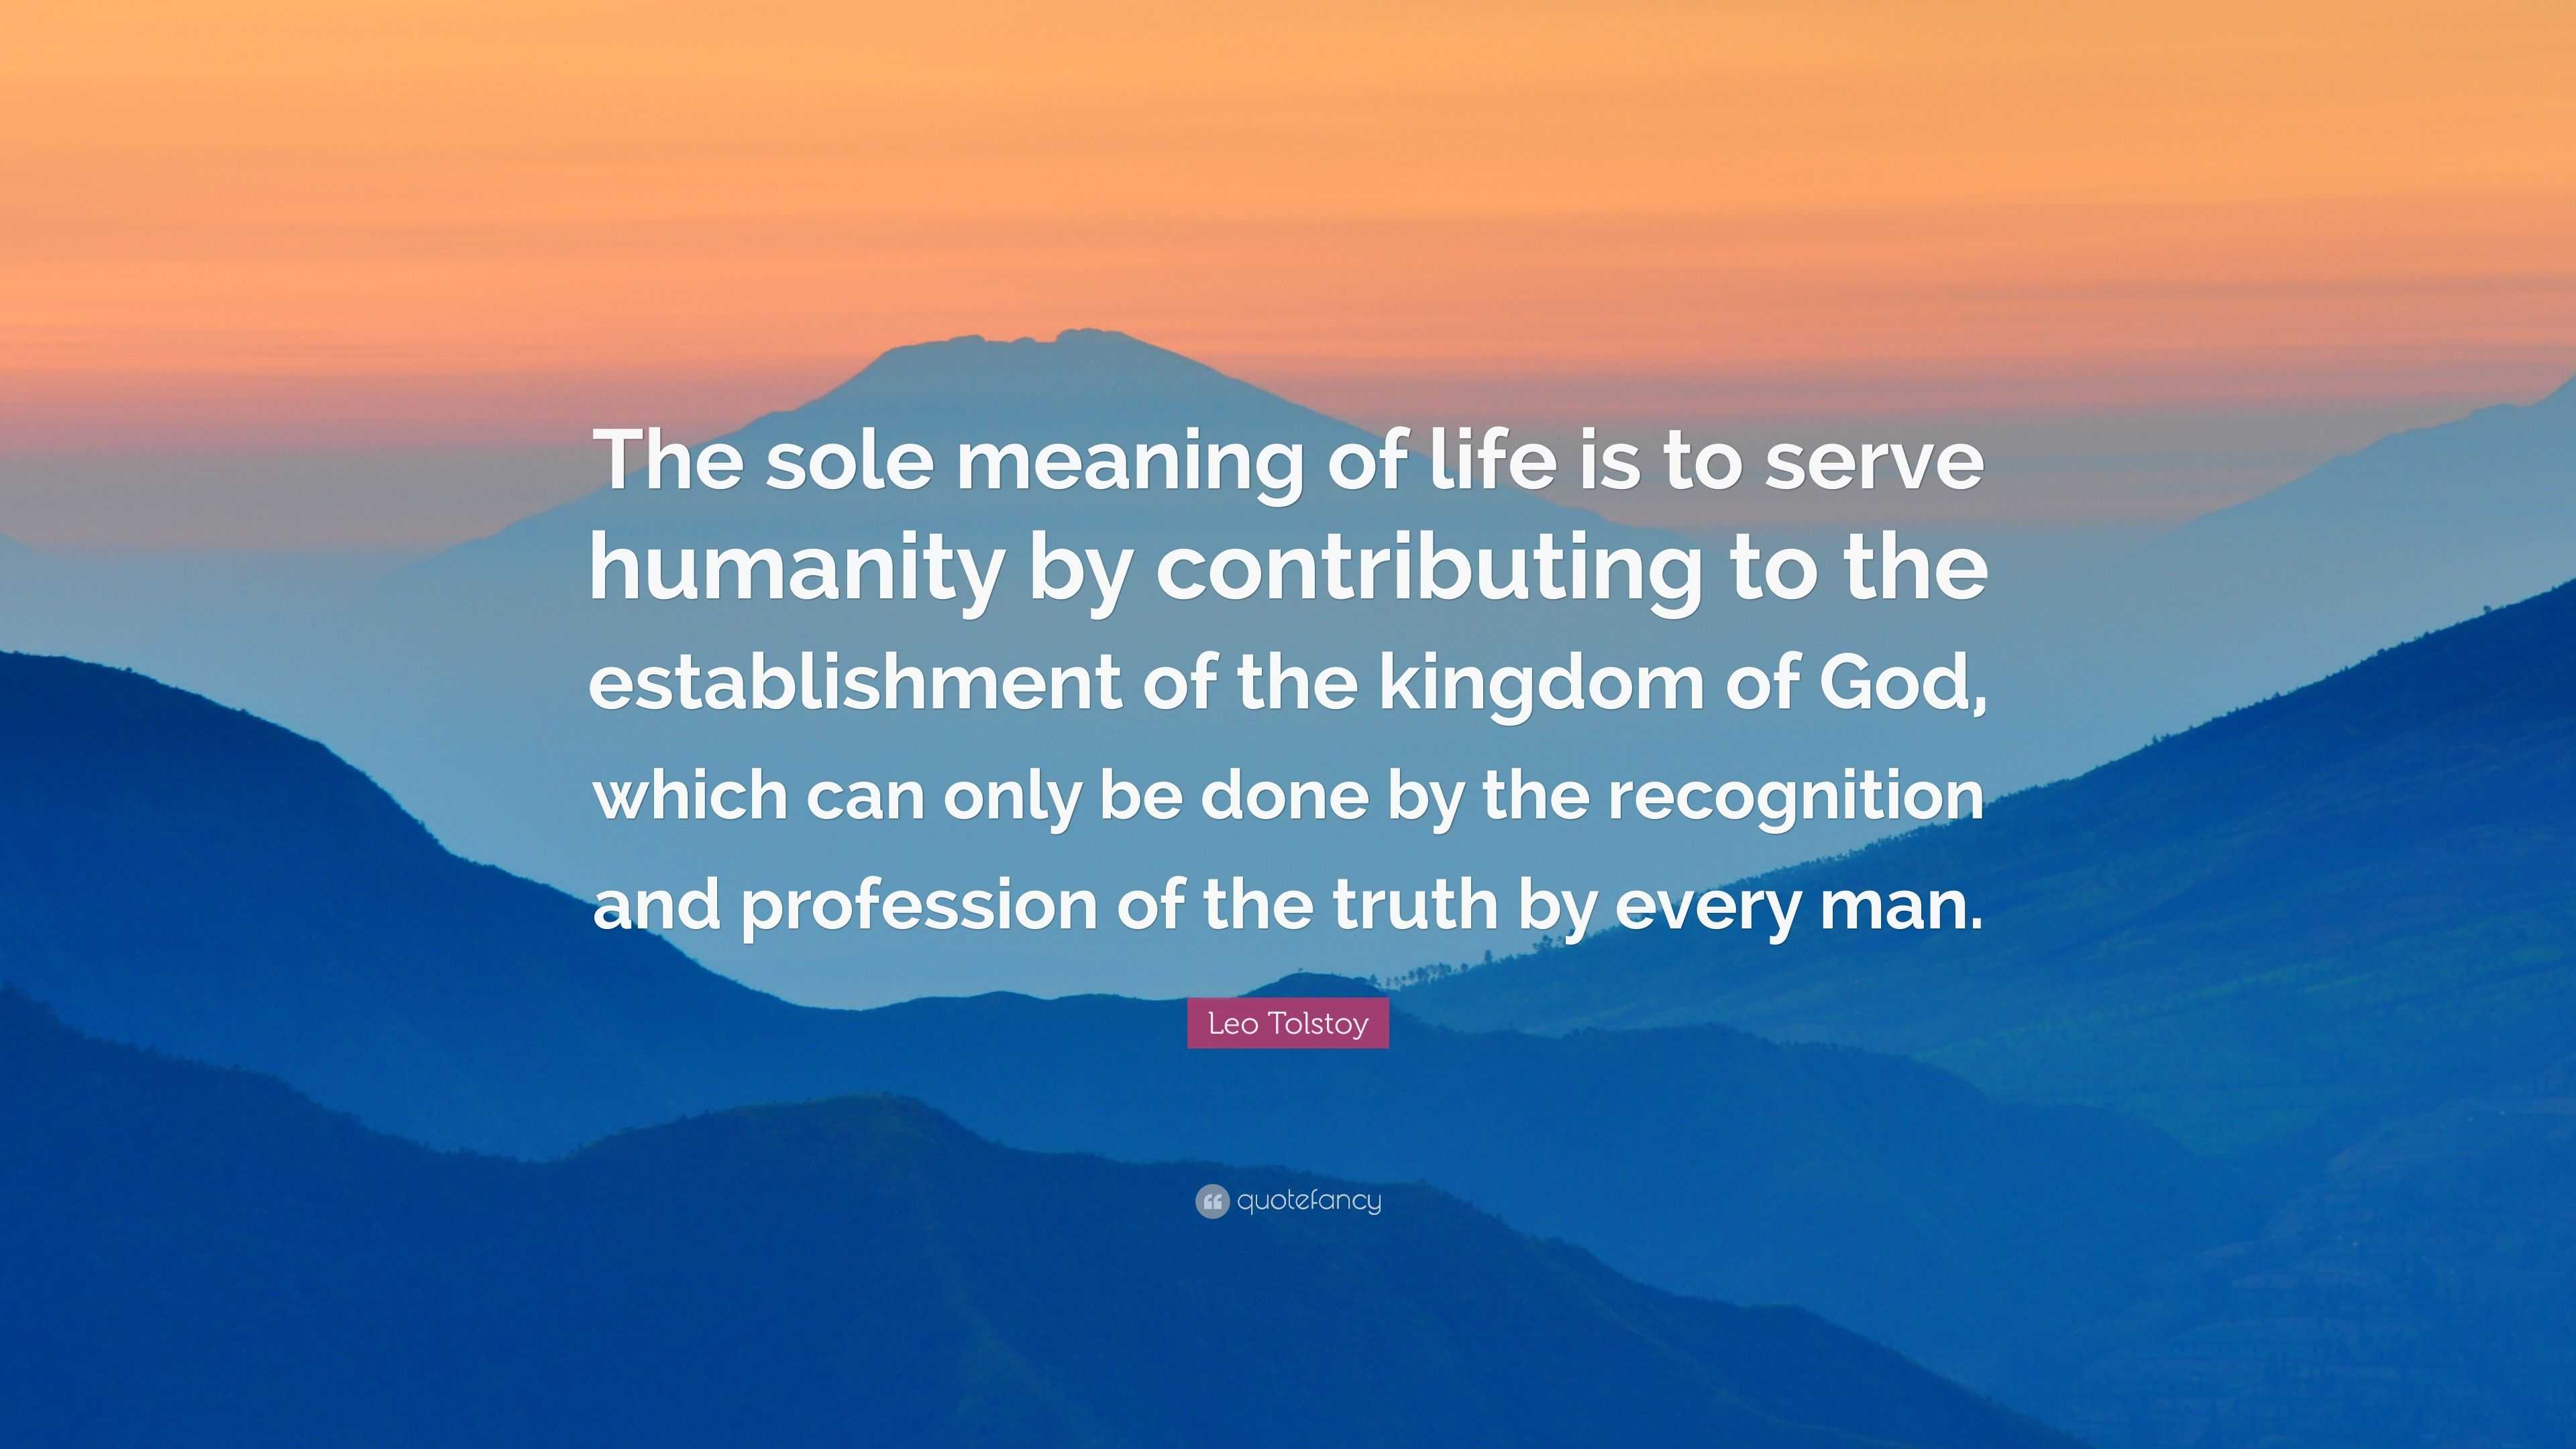 Leo Tolstoy Quote The Sole Meaning Of Life Is To Serve Humanity By Contributing To The Establishment Of The Kingdom Of God Which Can Only